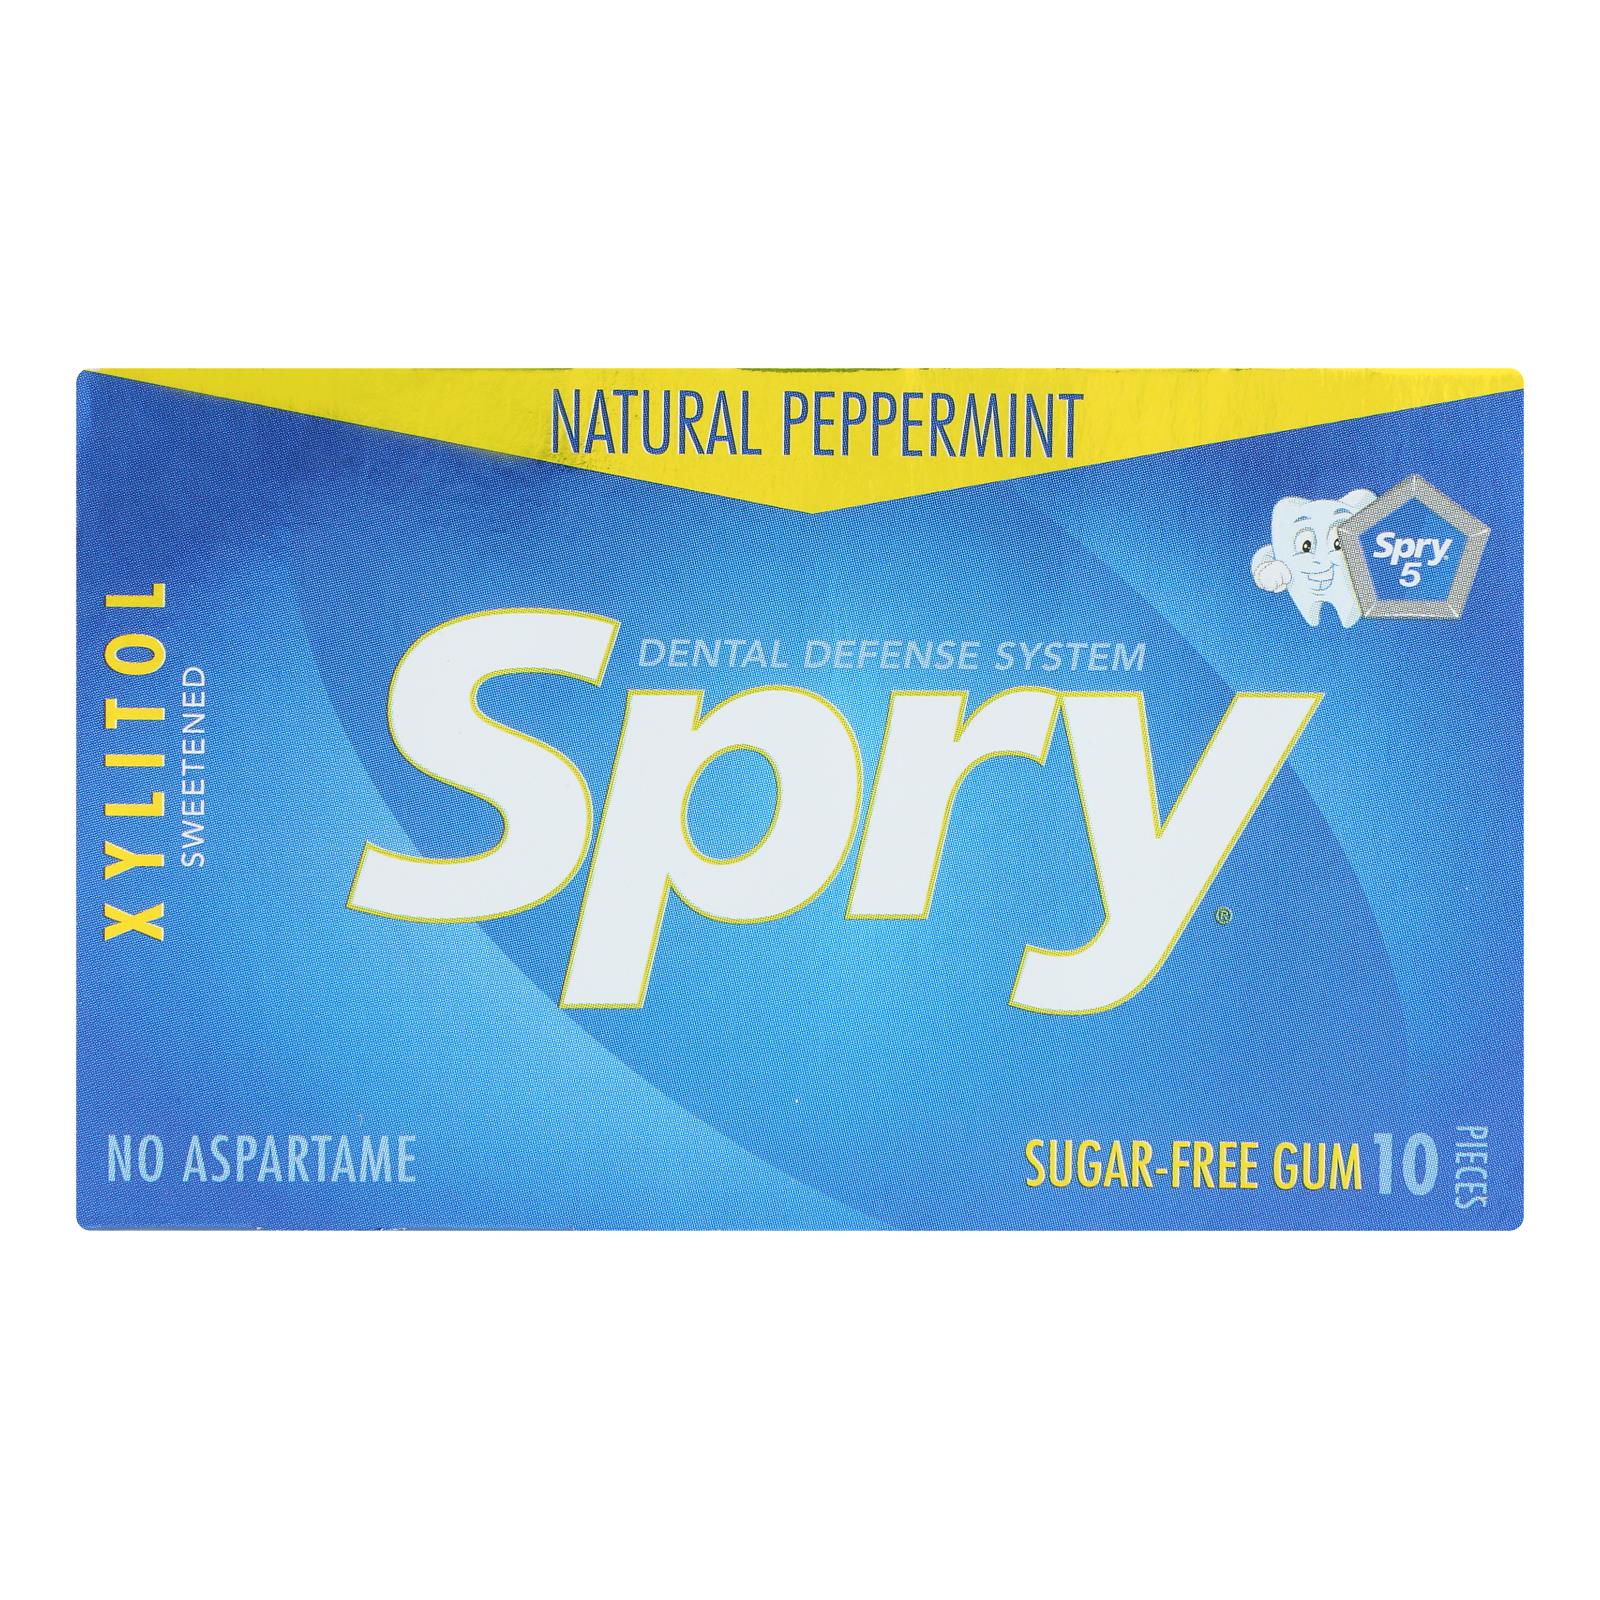 Spry Xylitol Gems - Peppermint - Case Of 20 - 10 Count